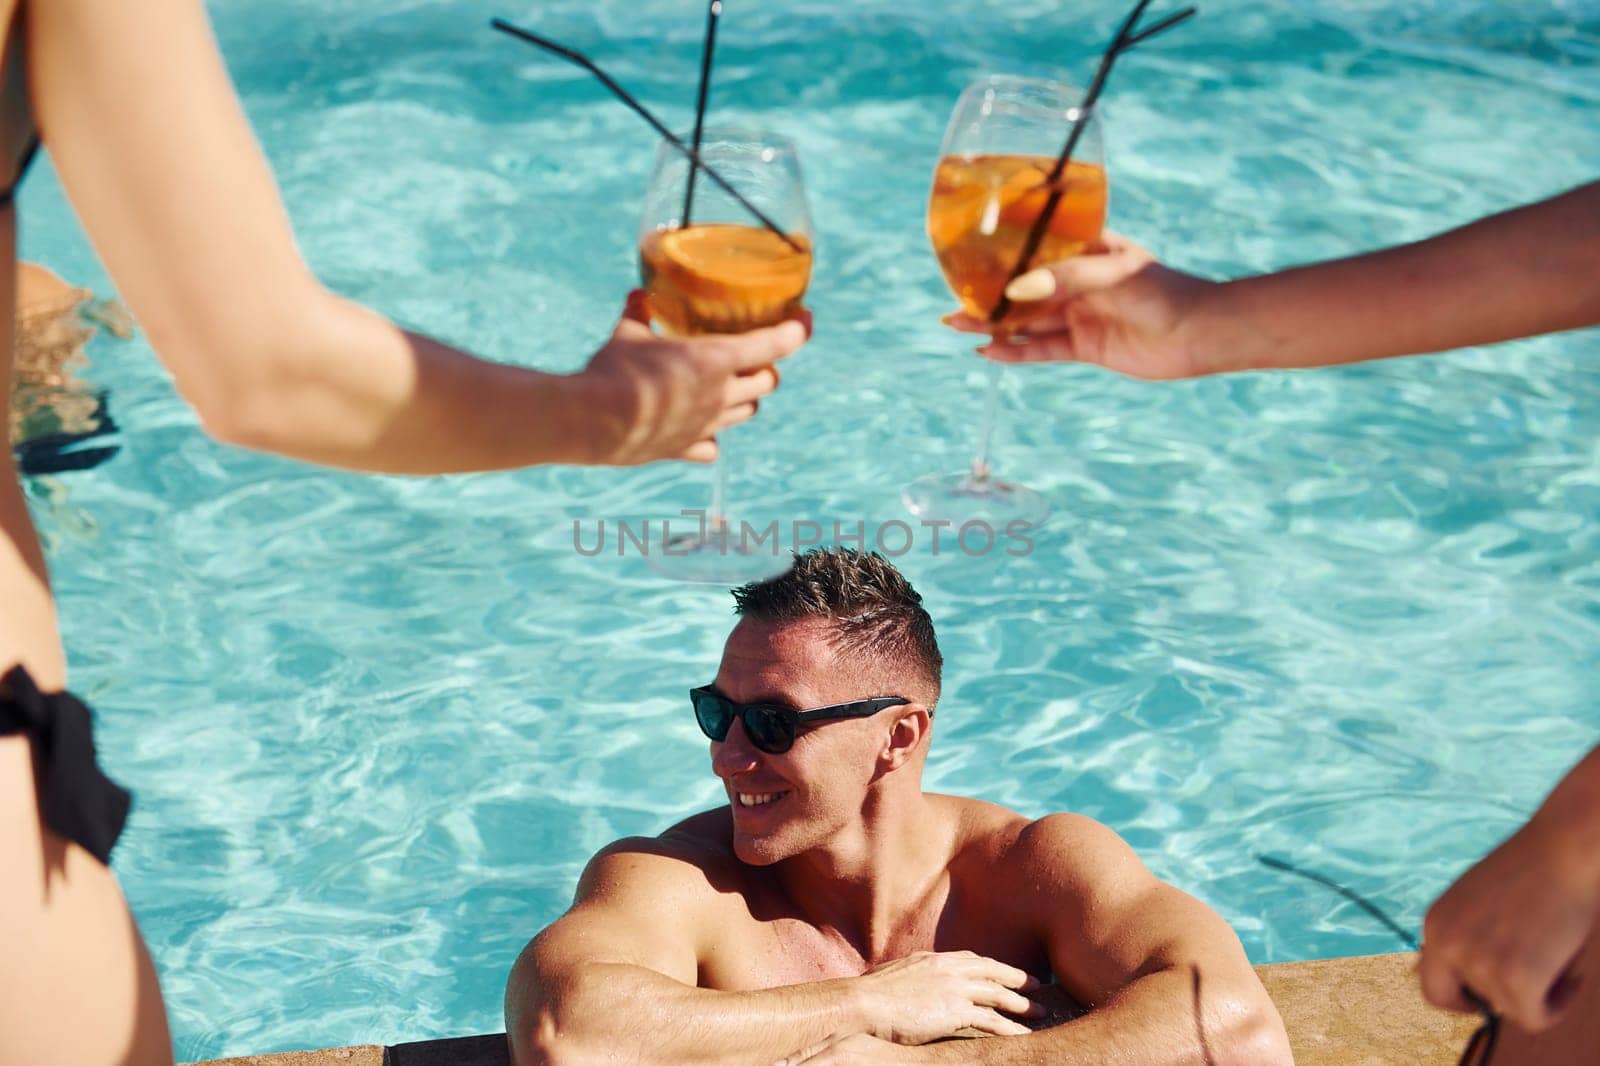 Fresh cocktails in hands. Group of young happy people have fun in swimming pool at daytime by Standret